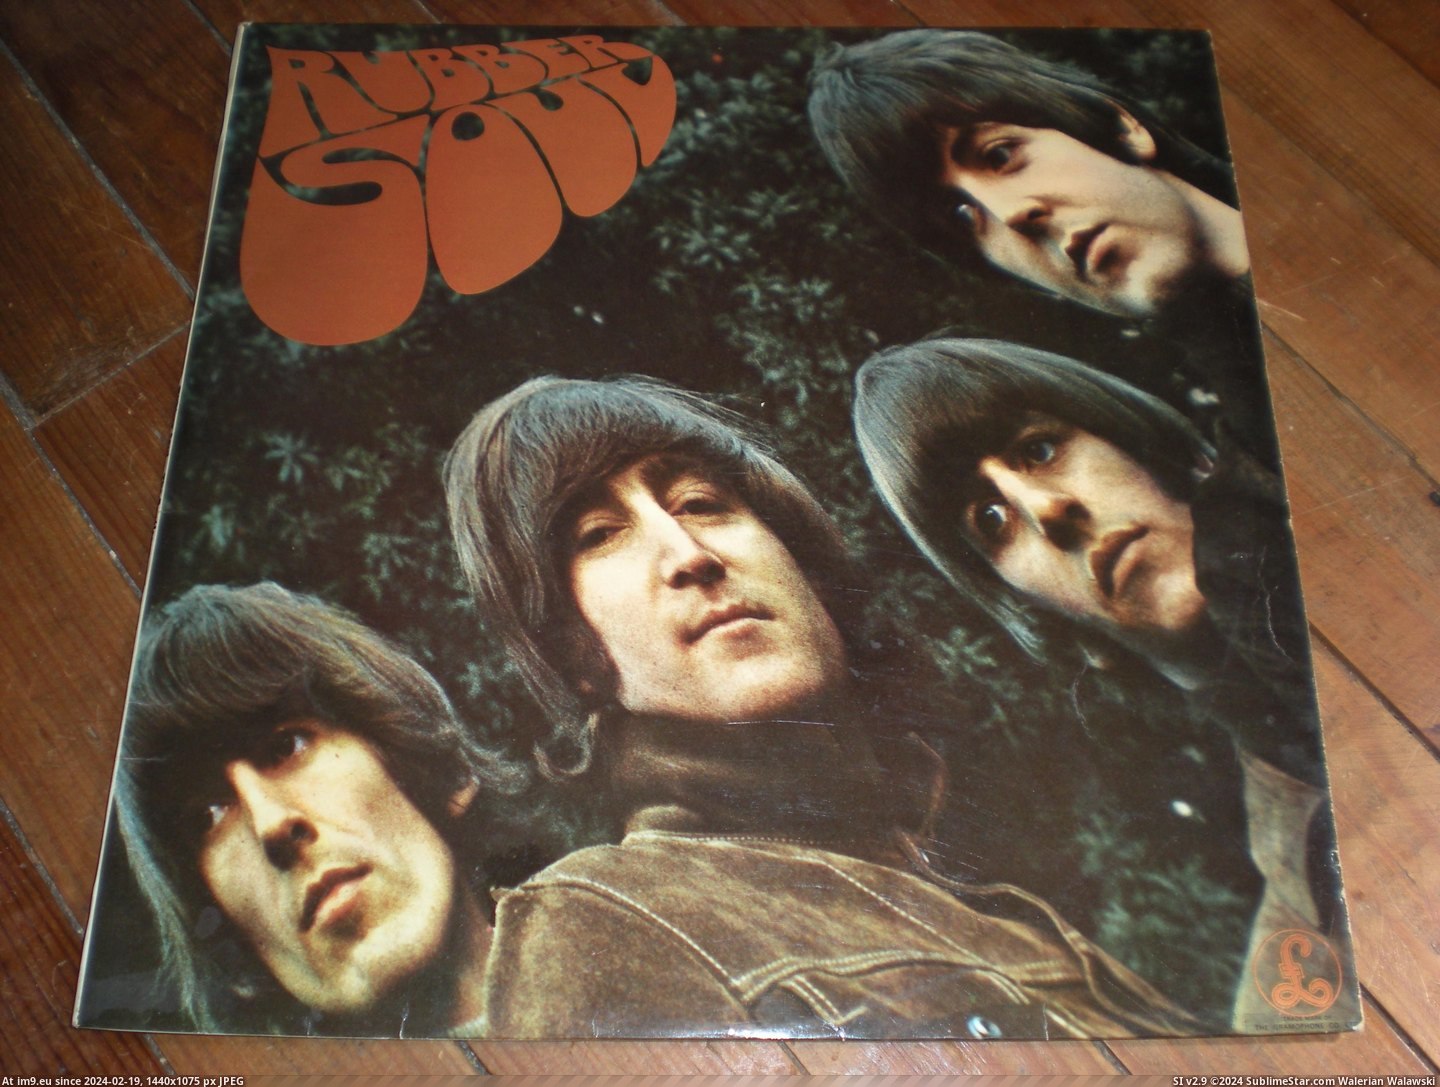 #Rubber #Stereo #Soul Rubber Soul STEREO 6 Pic. (Изображение из альбом new 1))